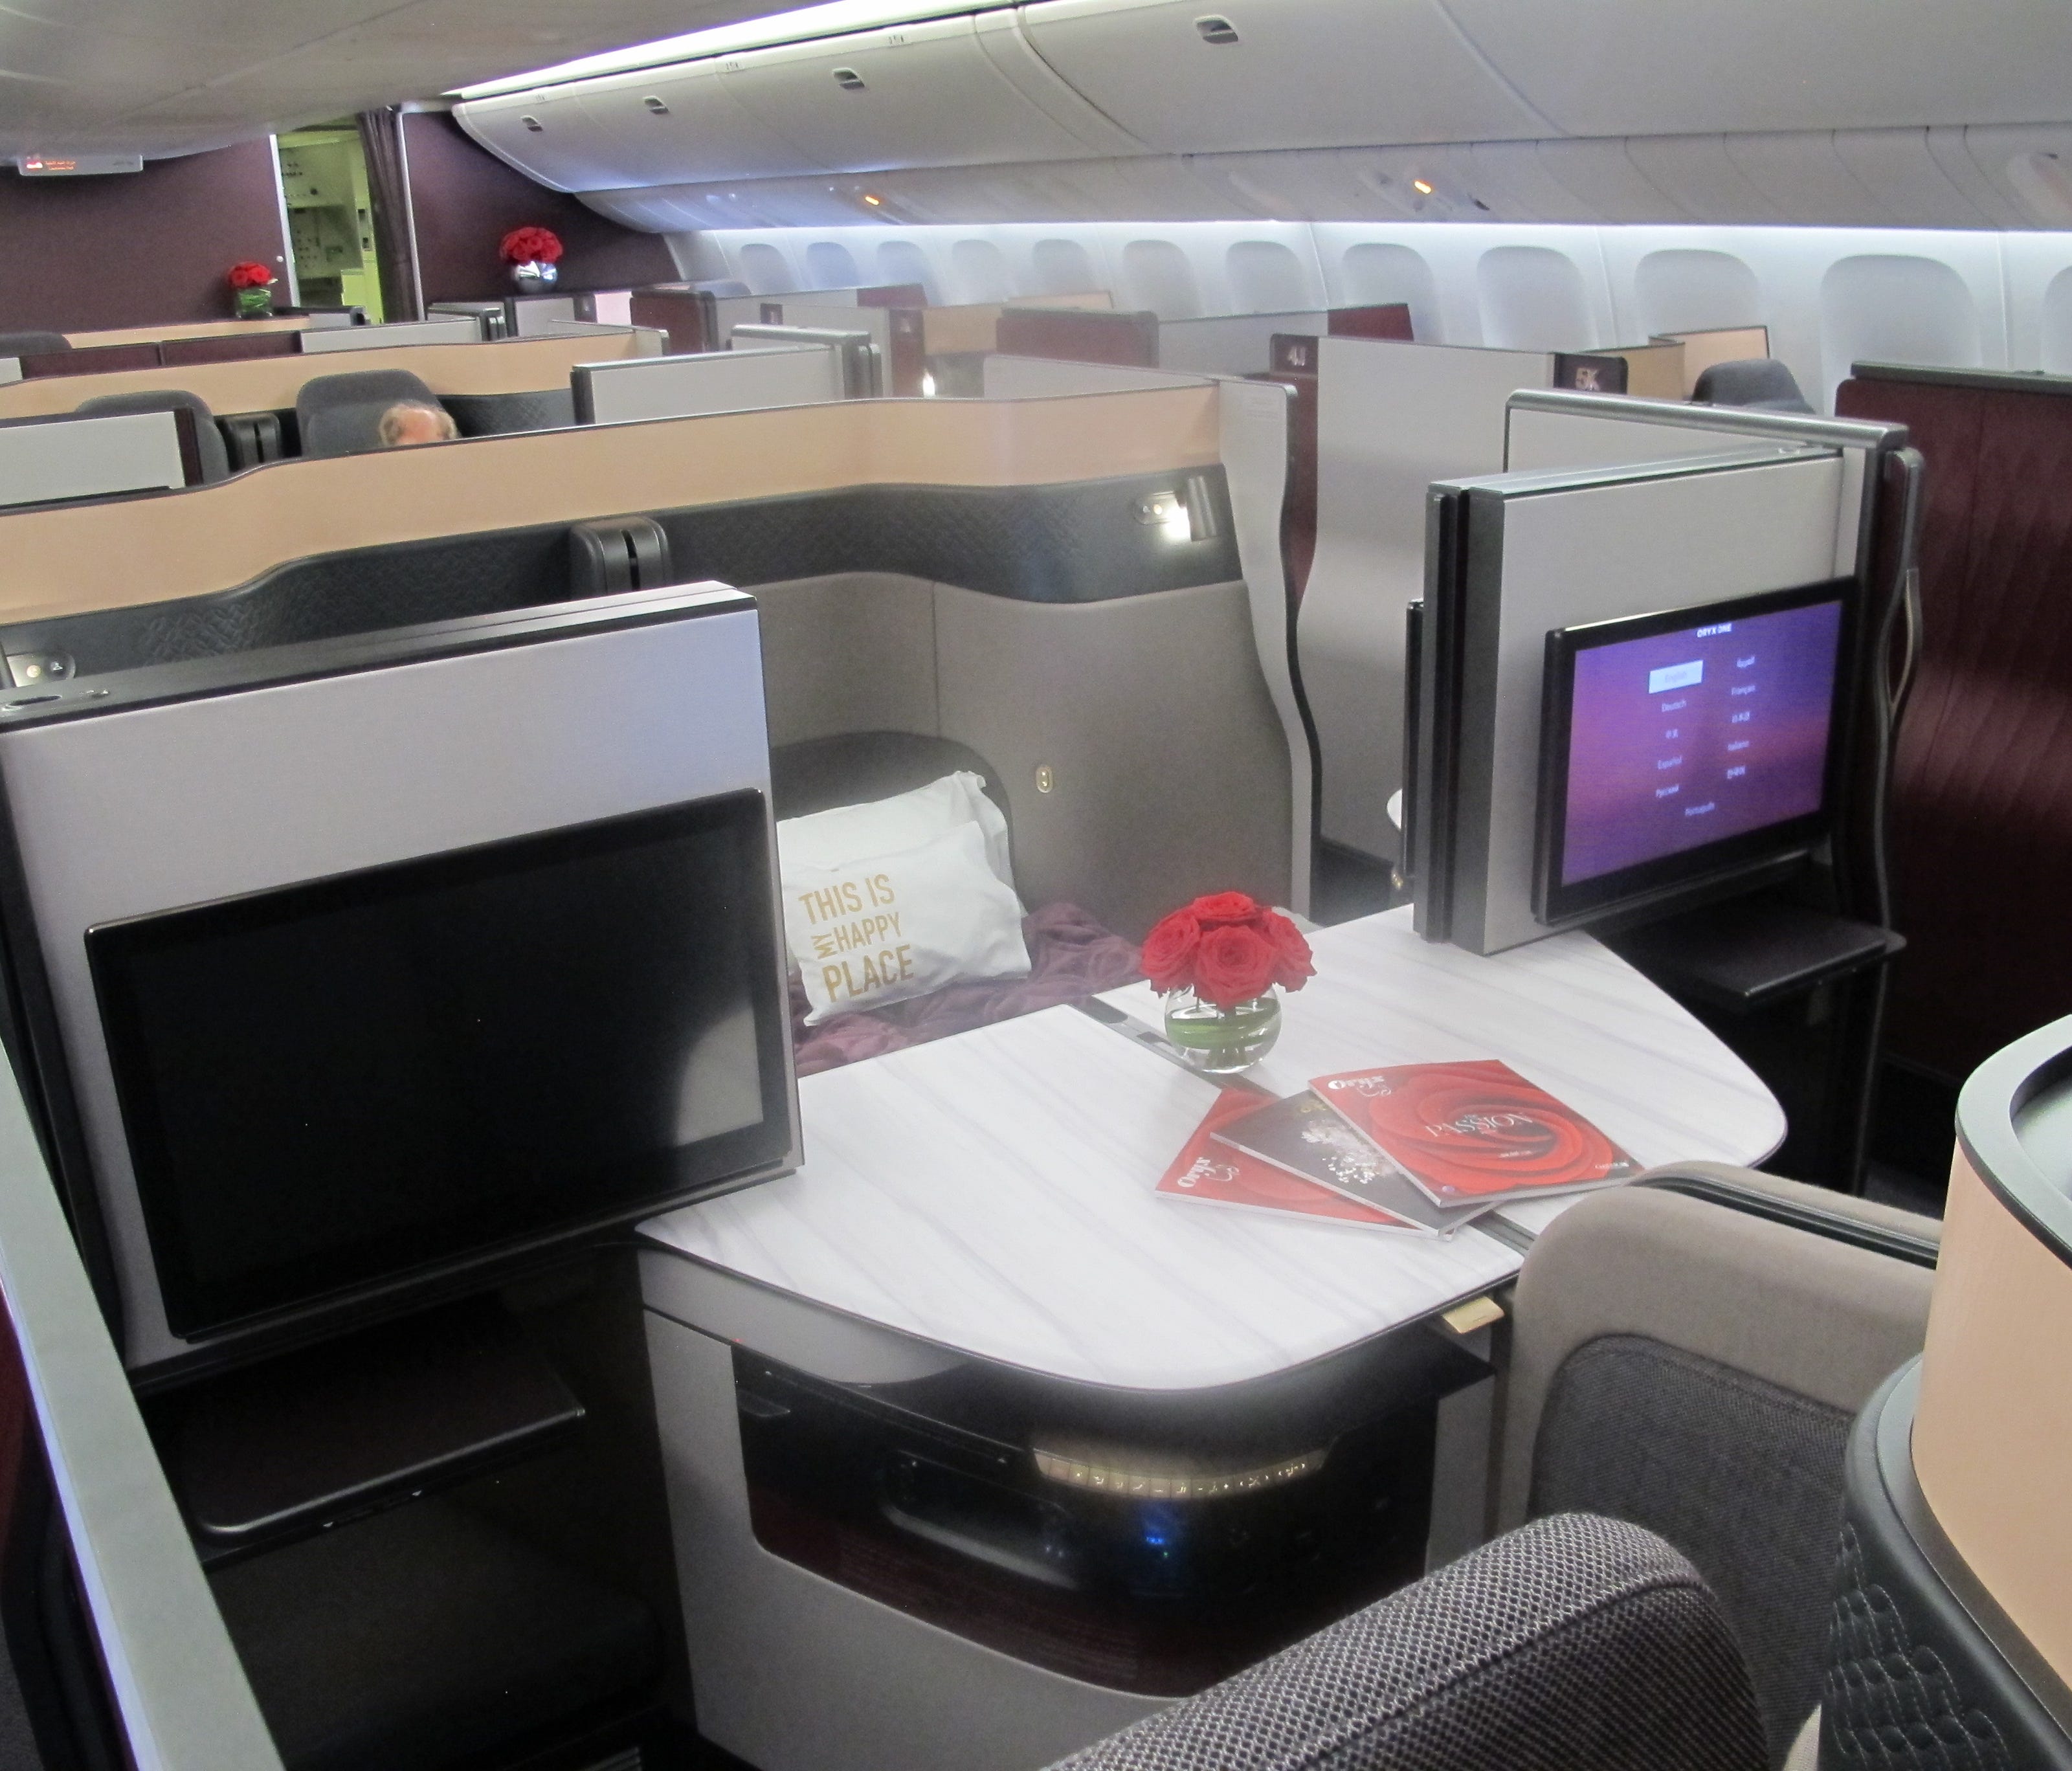 Qatar Airways' new 'Qsuite' business class seats are seen on one of the airline's Boeing 777 jets at the Paris Air show on June 19, 2017.